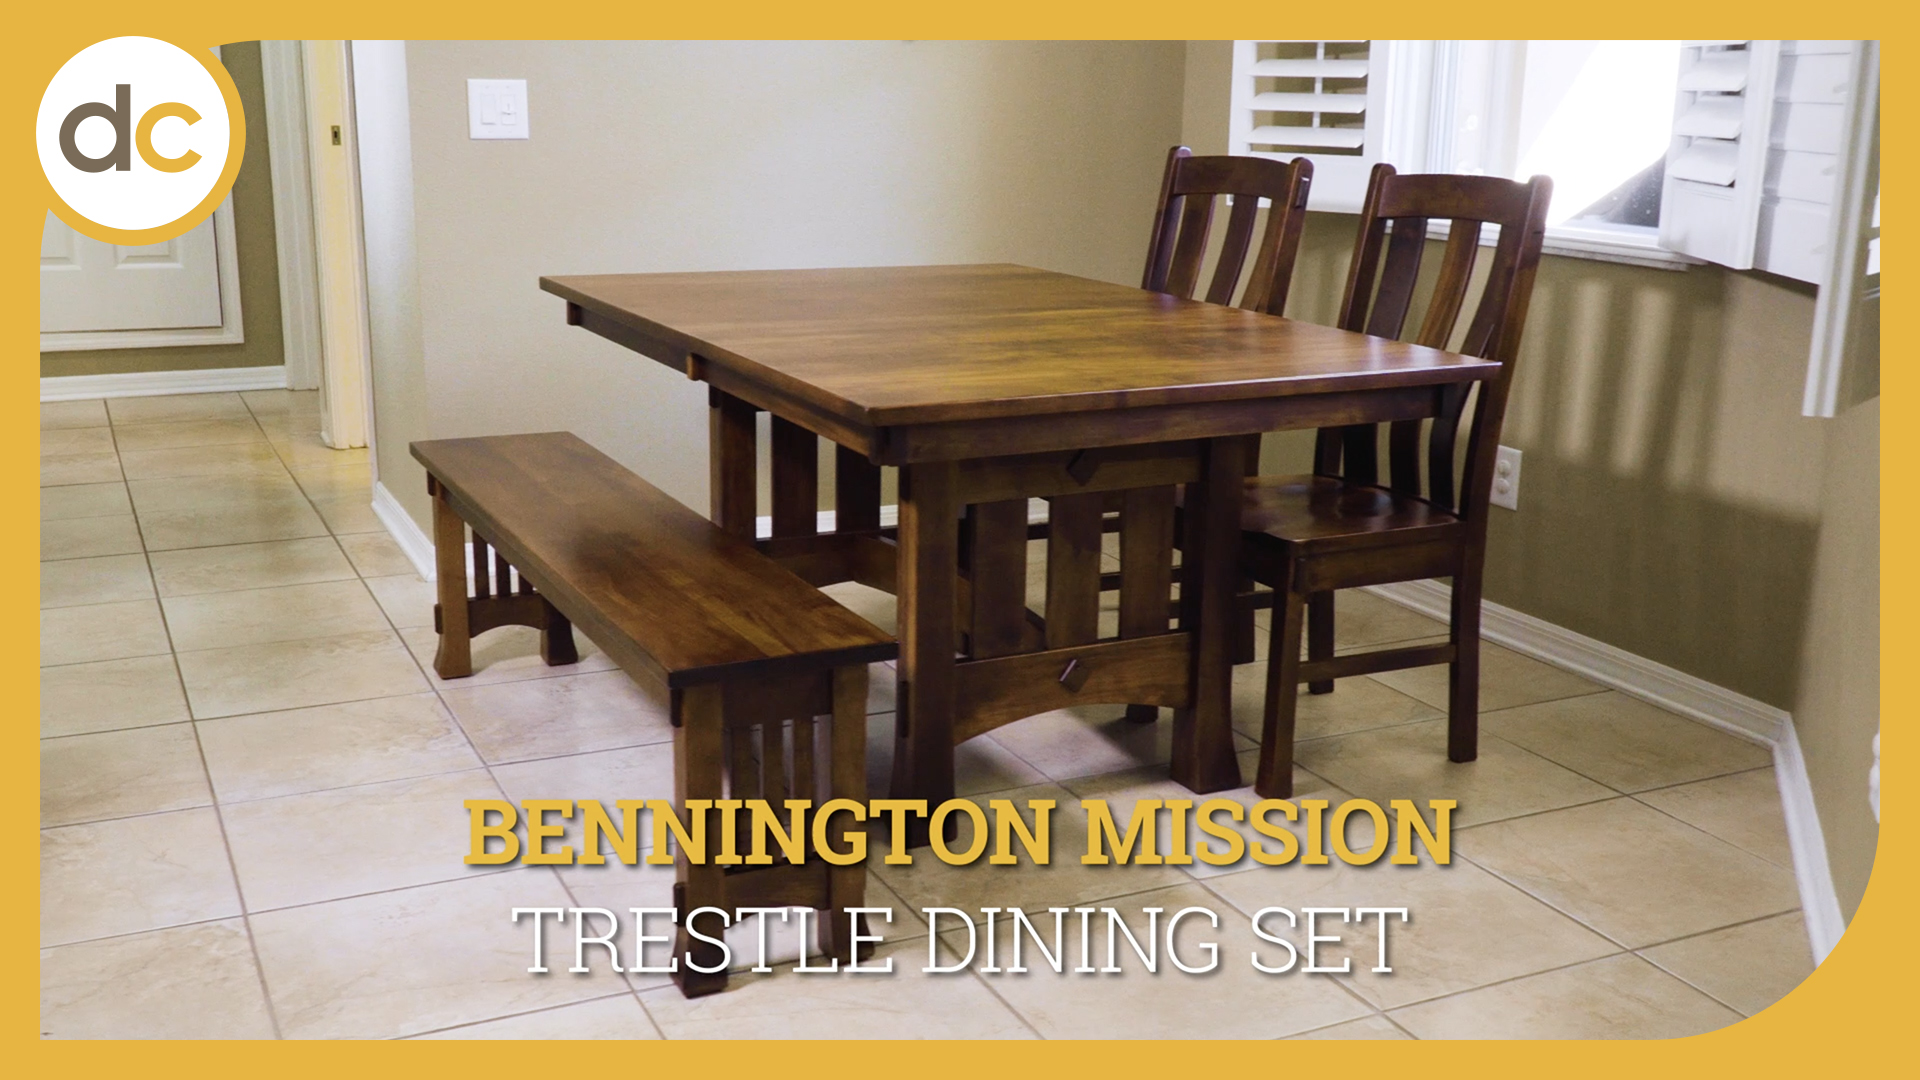 A dining set in a modern suburban home is topped with the title, "Bennington Mission Trestle Dining Set"